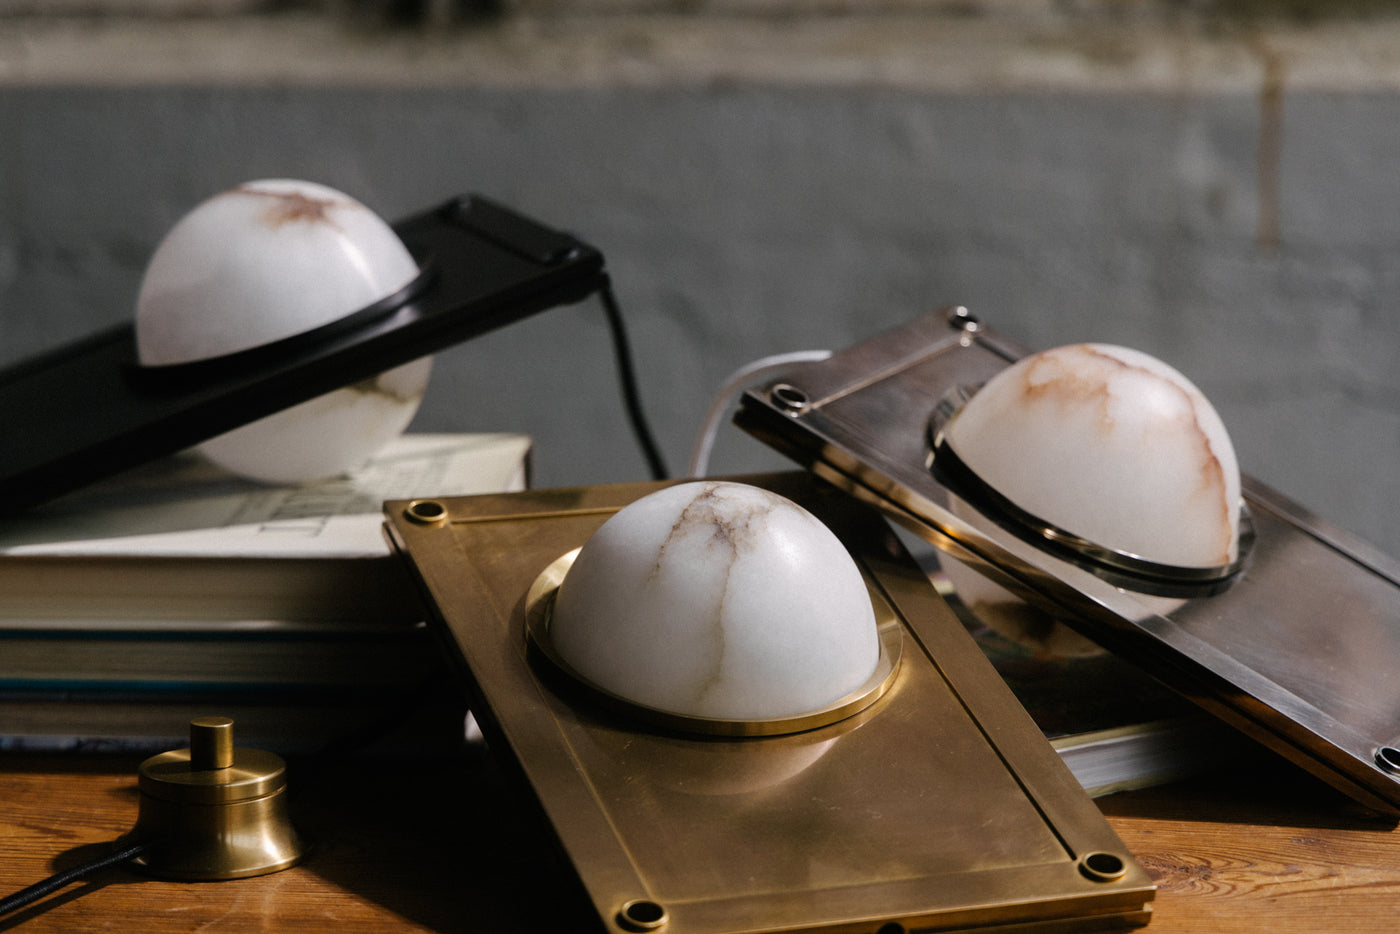 Three Nima Table Lights - consisting of a white alabaster globe set, porthole-style, within a refined slab of bronzed, antiqued, or nickeled brass - are arrayed at various angles on a wooden table with books.